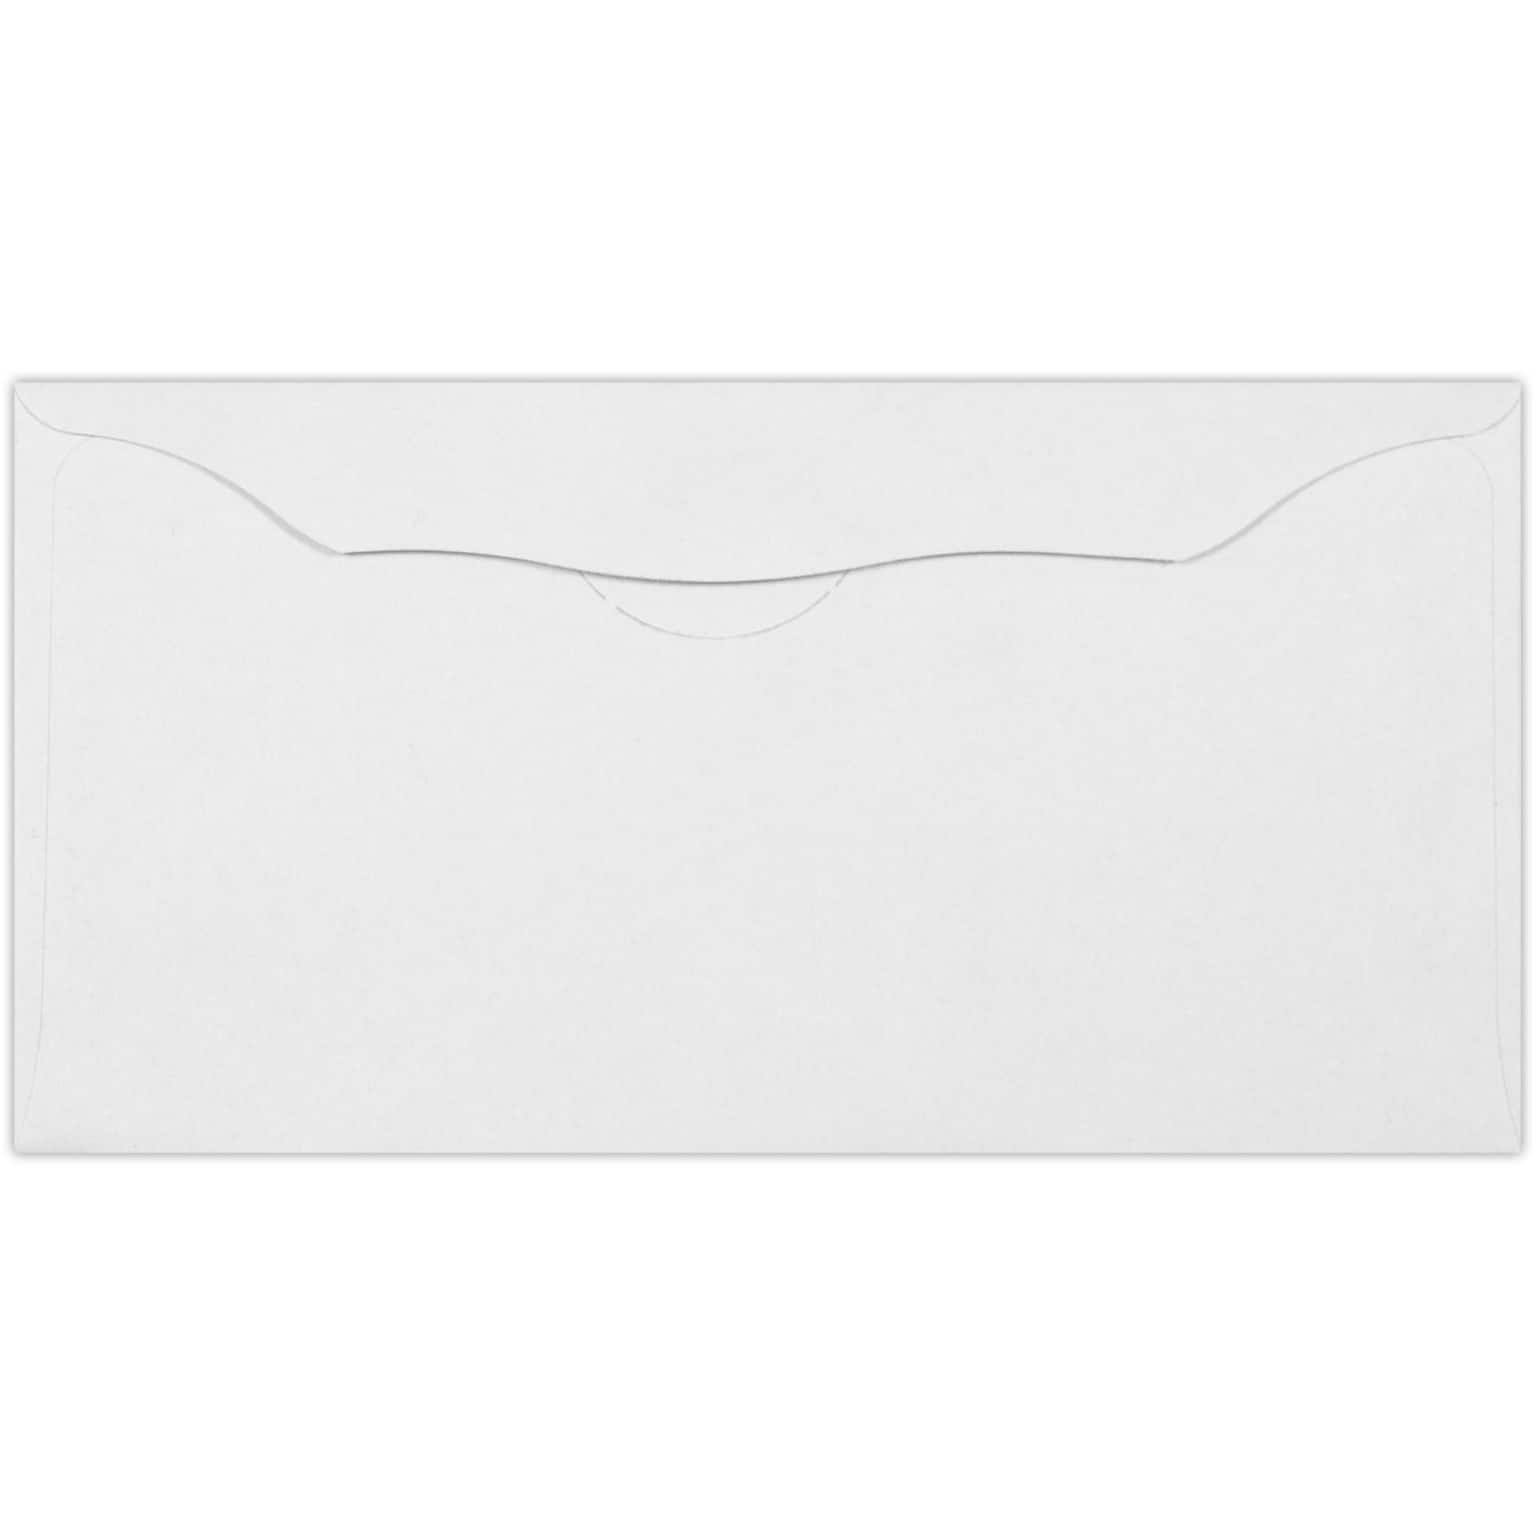 LUX Offering Envelopes (3 1/8 x 6 1/4) 500/Pack, White (WS-7605-500)